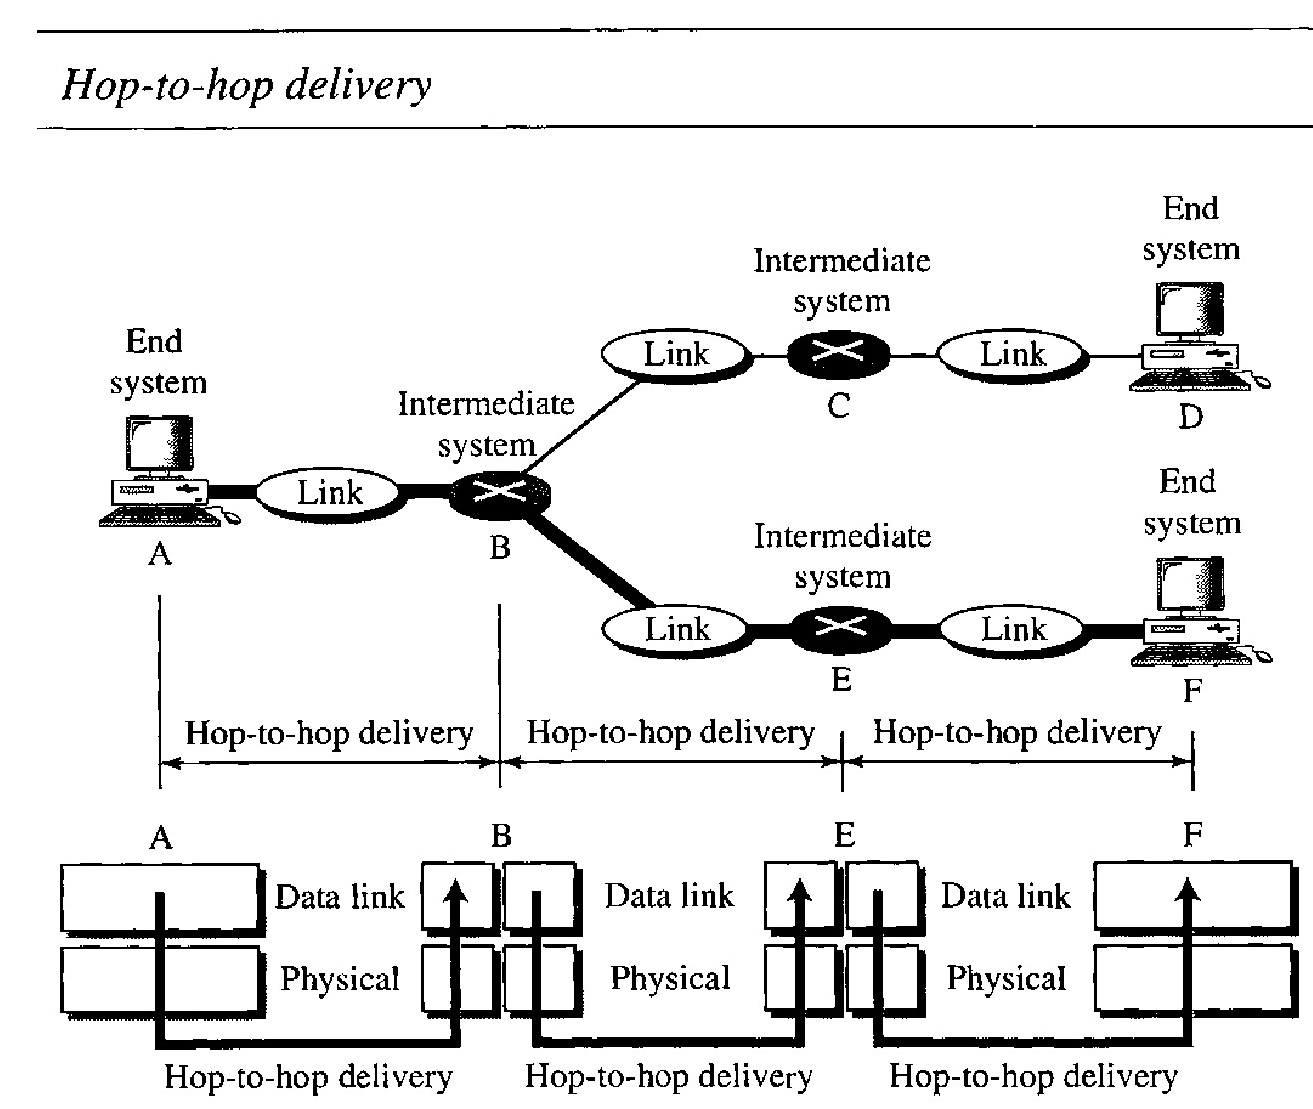 illustrates hop-to-hop (node-to-node) delivery by the data link layer